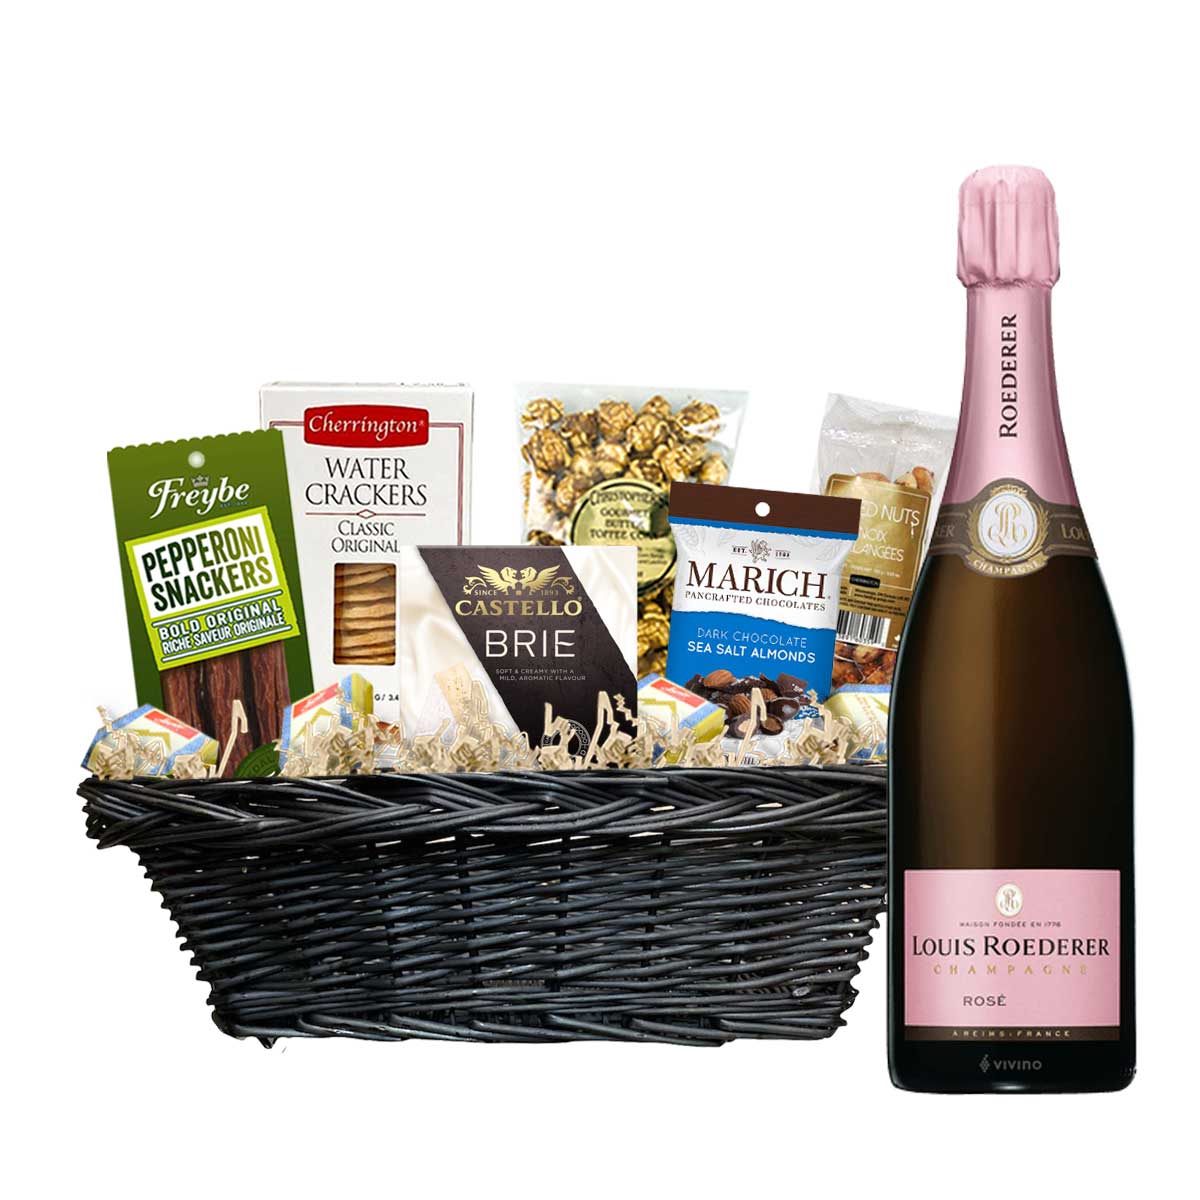 TAG Liquor Stores Canada Delivery-Louis Roederer Rose Champagne 750ml Corporate Gift Basket-wine-tagliquorstores.com